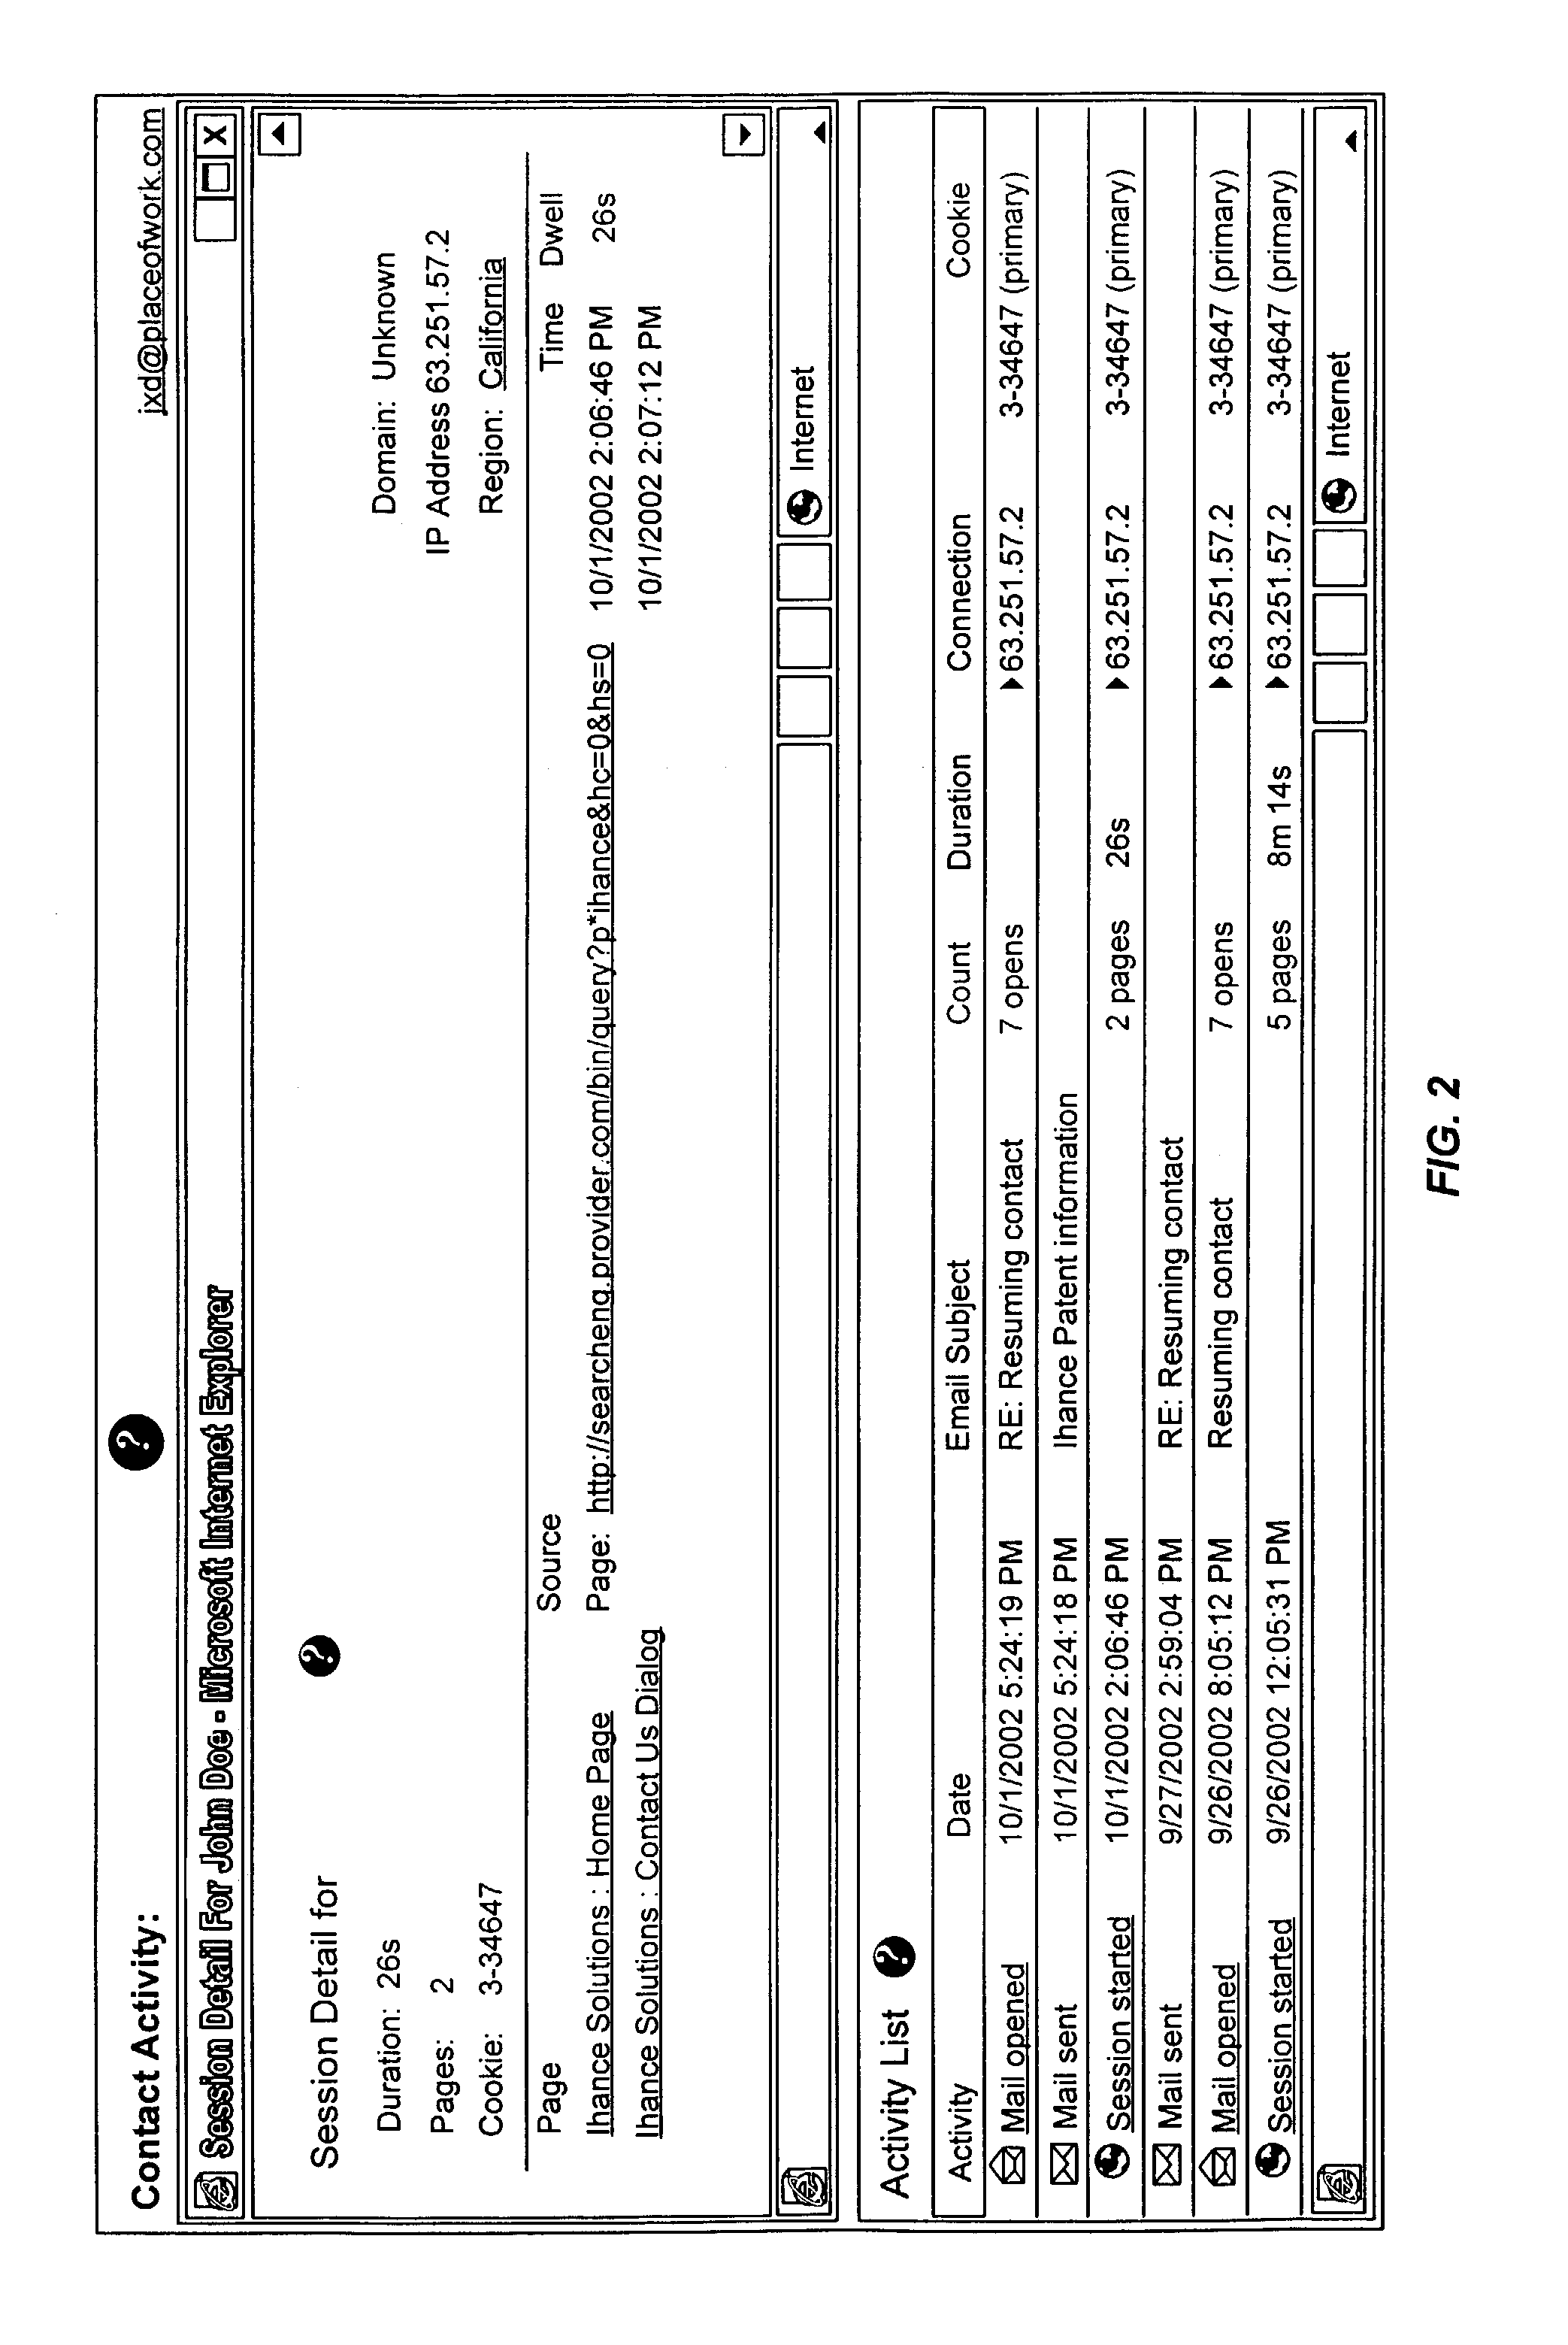 Method and system for monitoring e-mail and website behavior of an e-mail recipient